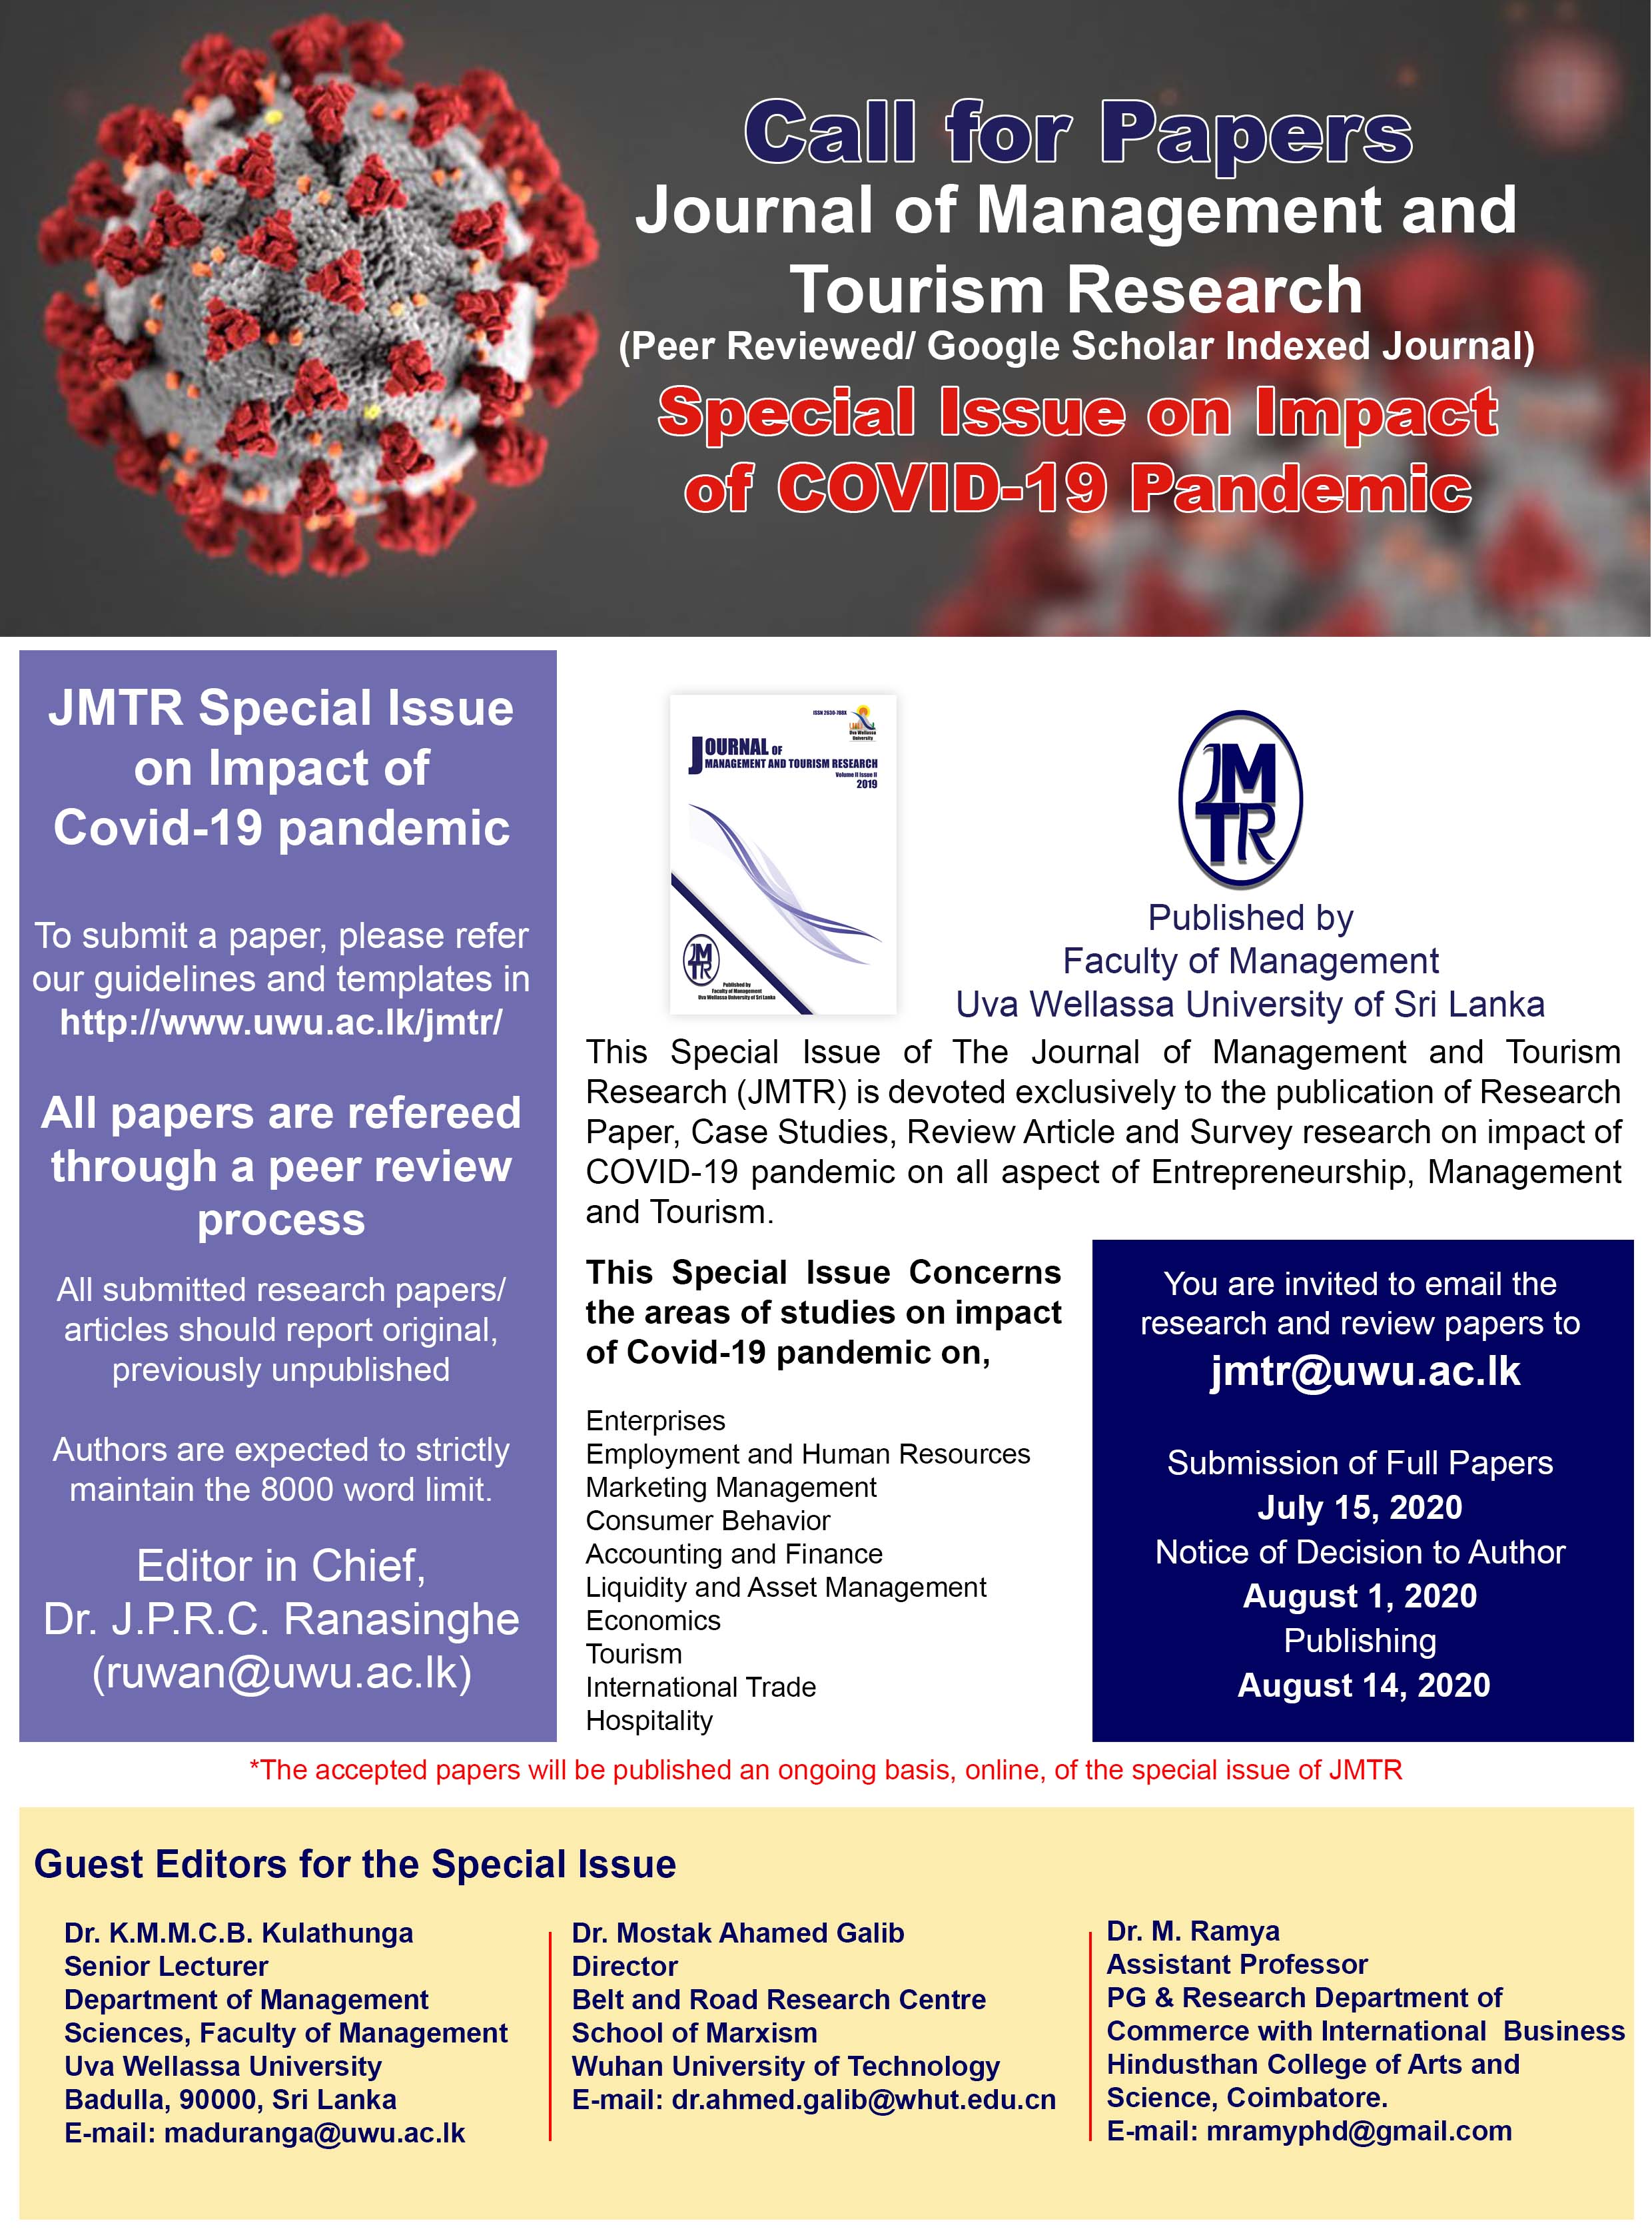 Special Issue on Impact of COVID-19 Pandemic